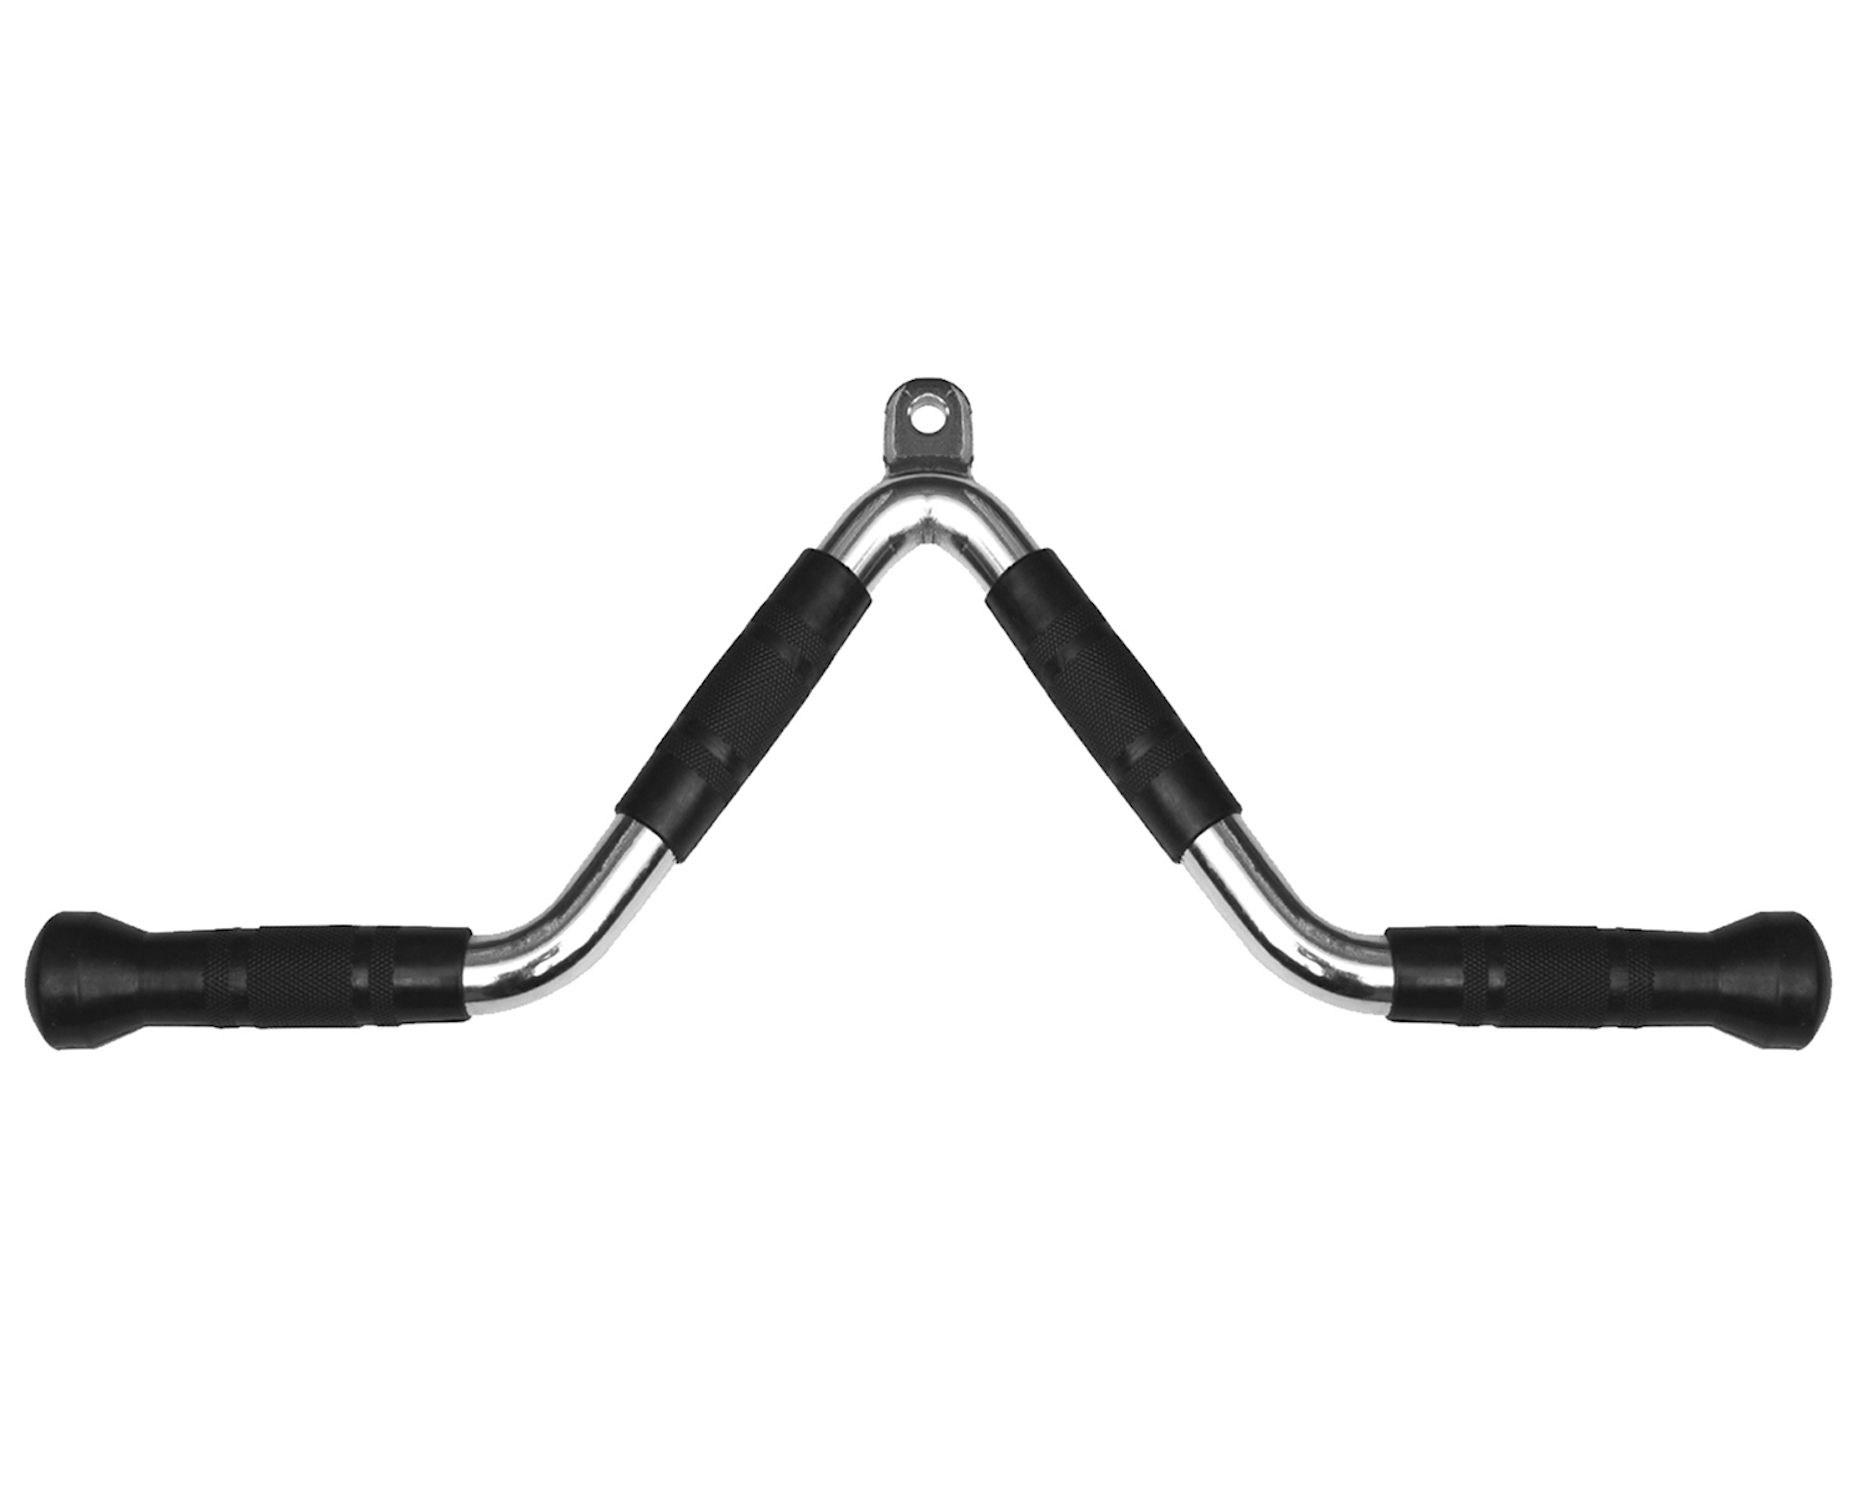 Cable Extended Tricep Bar - Cable Attachment - Fitness Hero Brand new